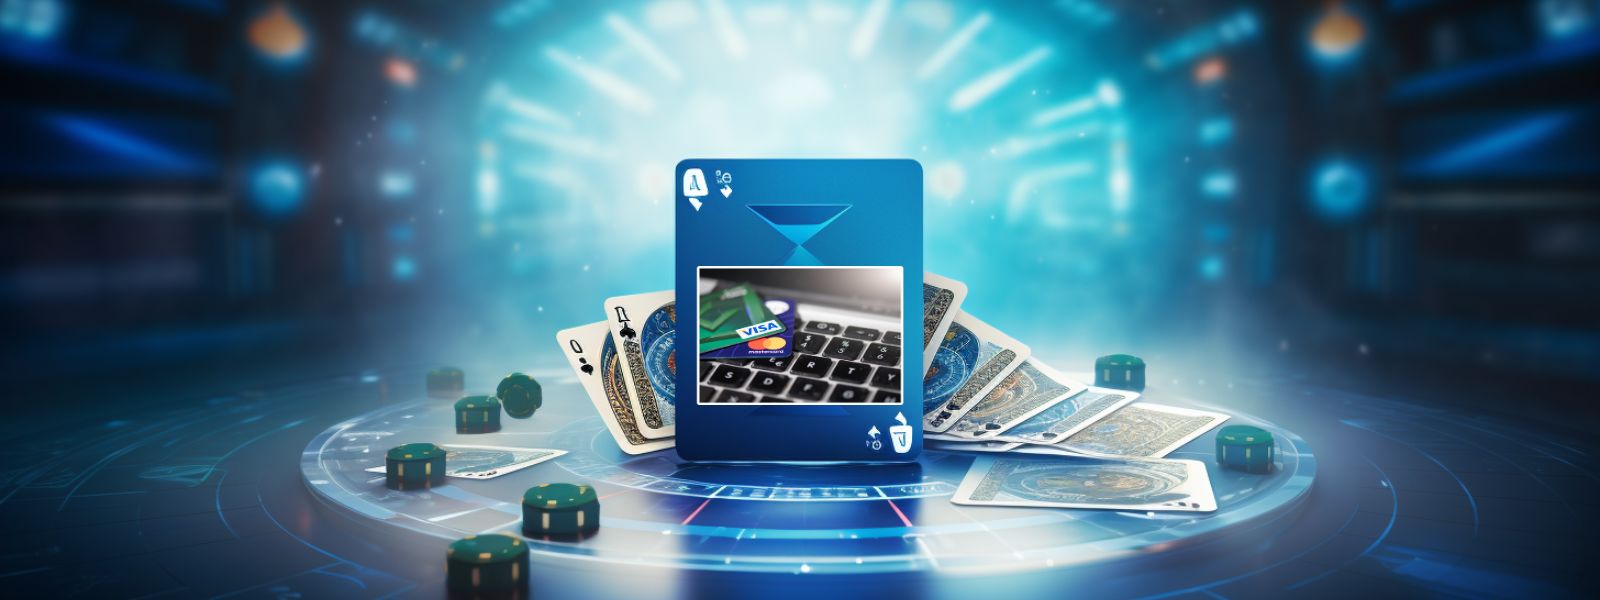 Visa Live casinos refer to online gambling platforms that permit the use of Visa as the main payment method and provide a great selection of live dealer games.